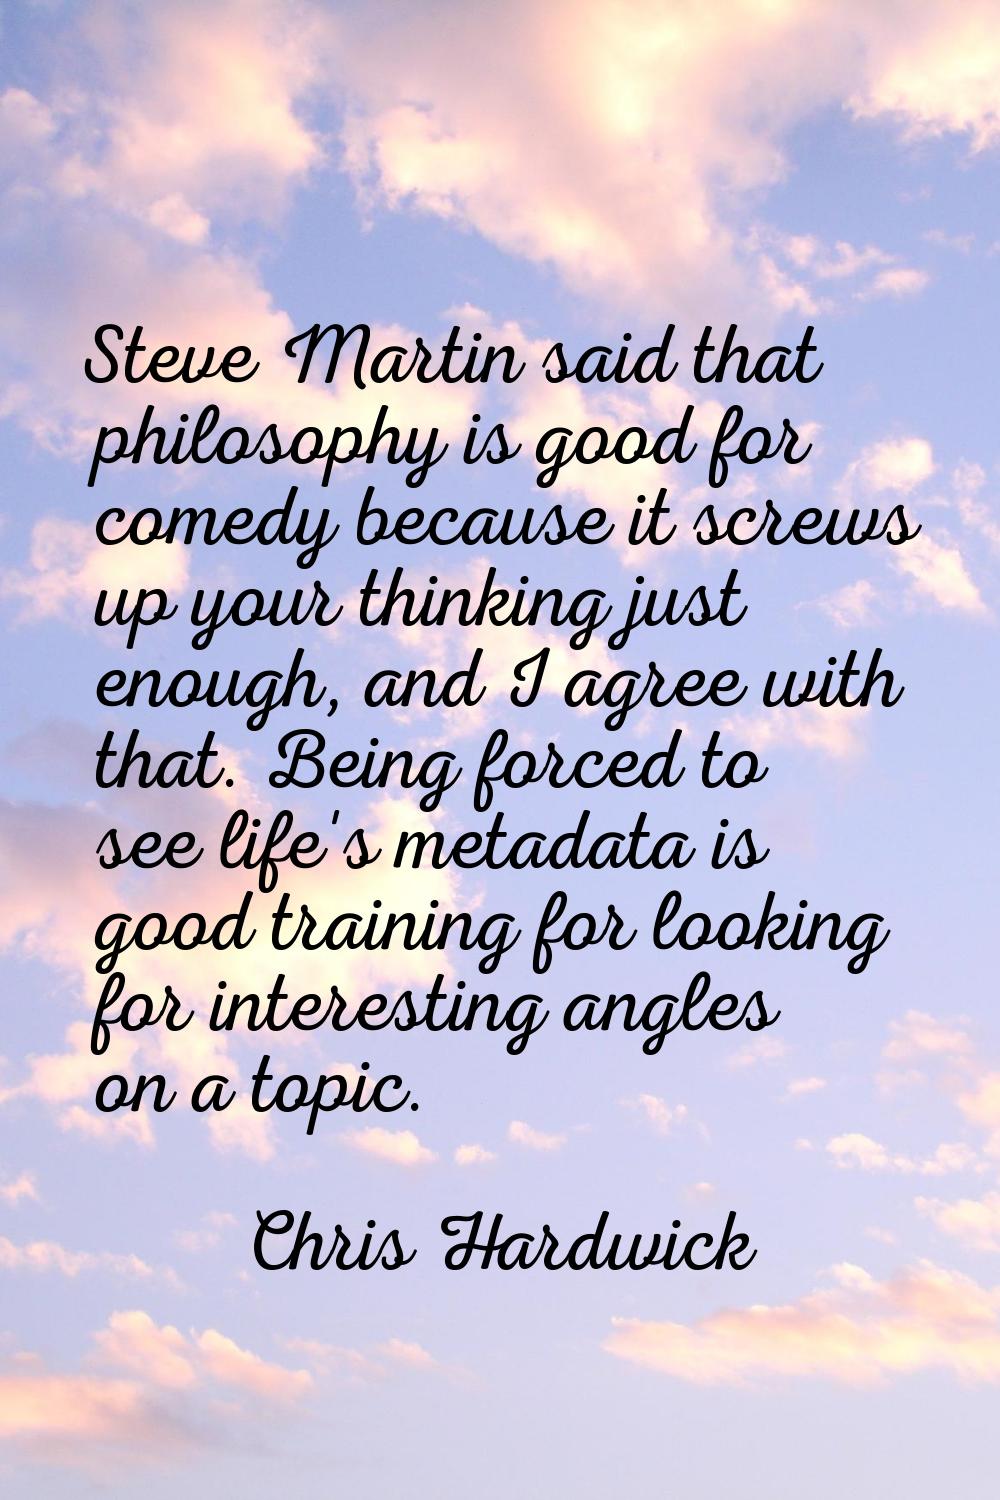 Steve Martin said that philosophy is good for comedy because it screws up your thinking just enough